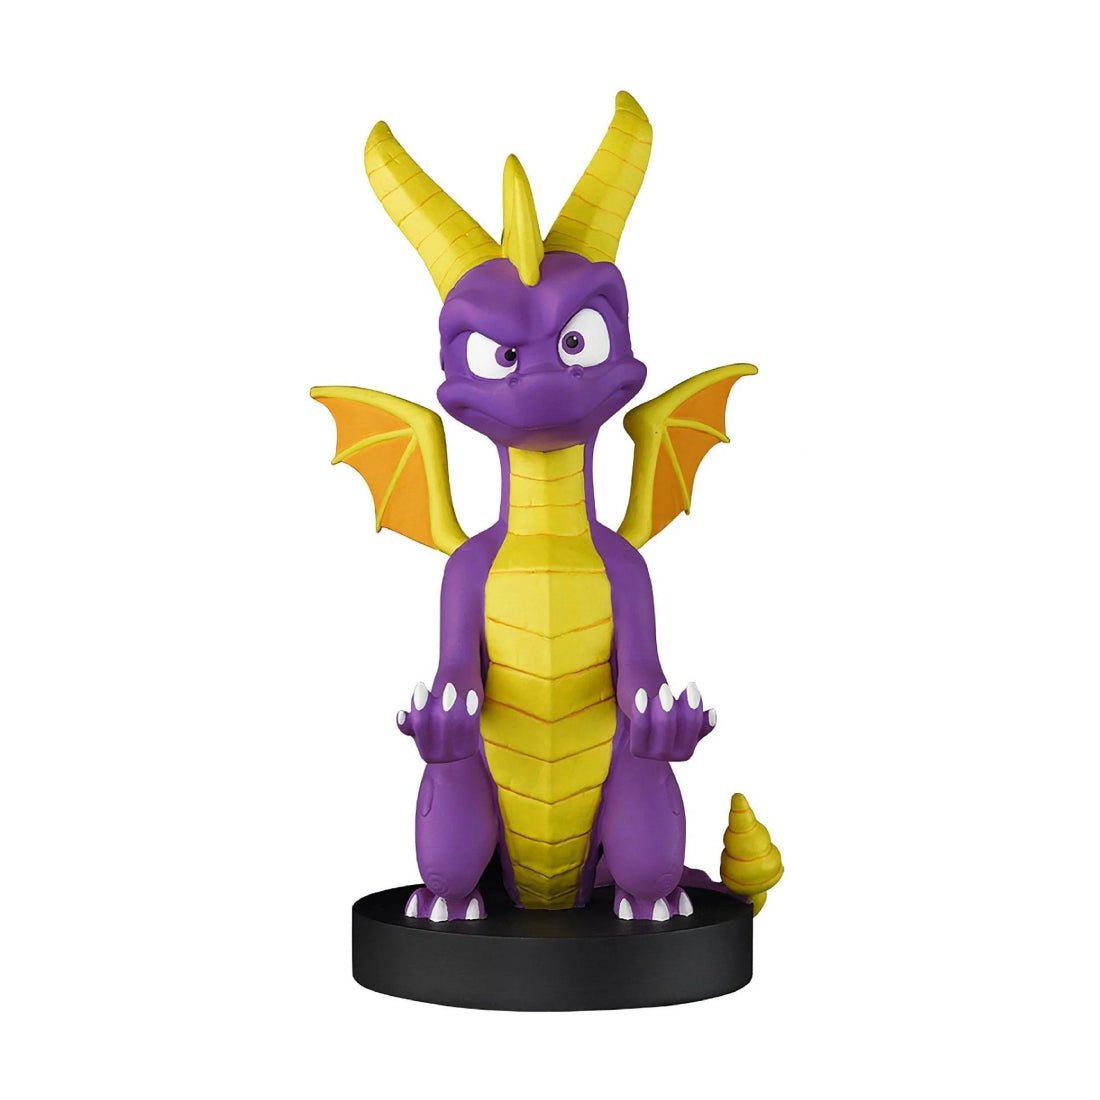 Cable Guys Spyro Gaming Controller & Mobile Phone Holder - حامل - Store 974 | ستور ٩٧٤